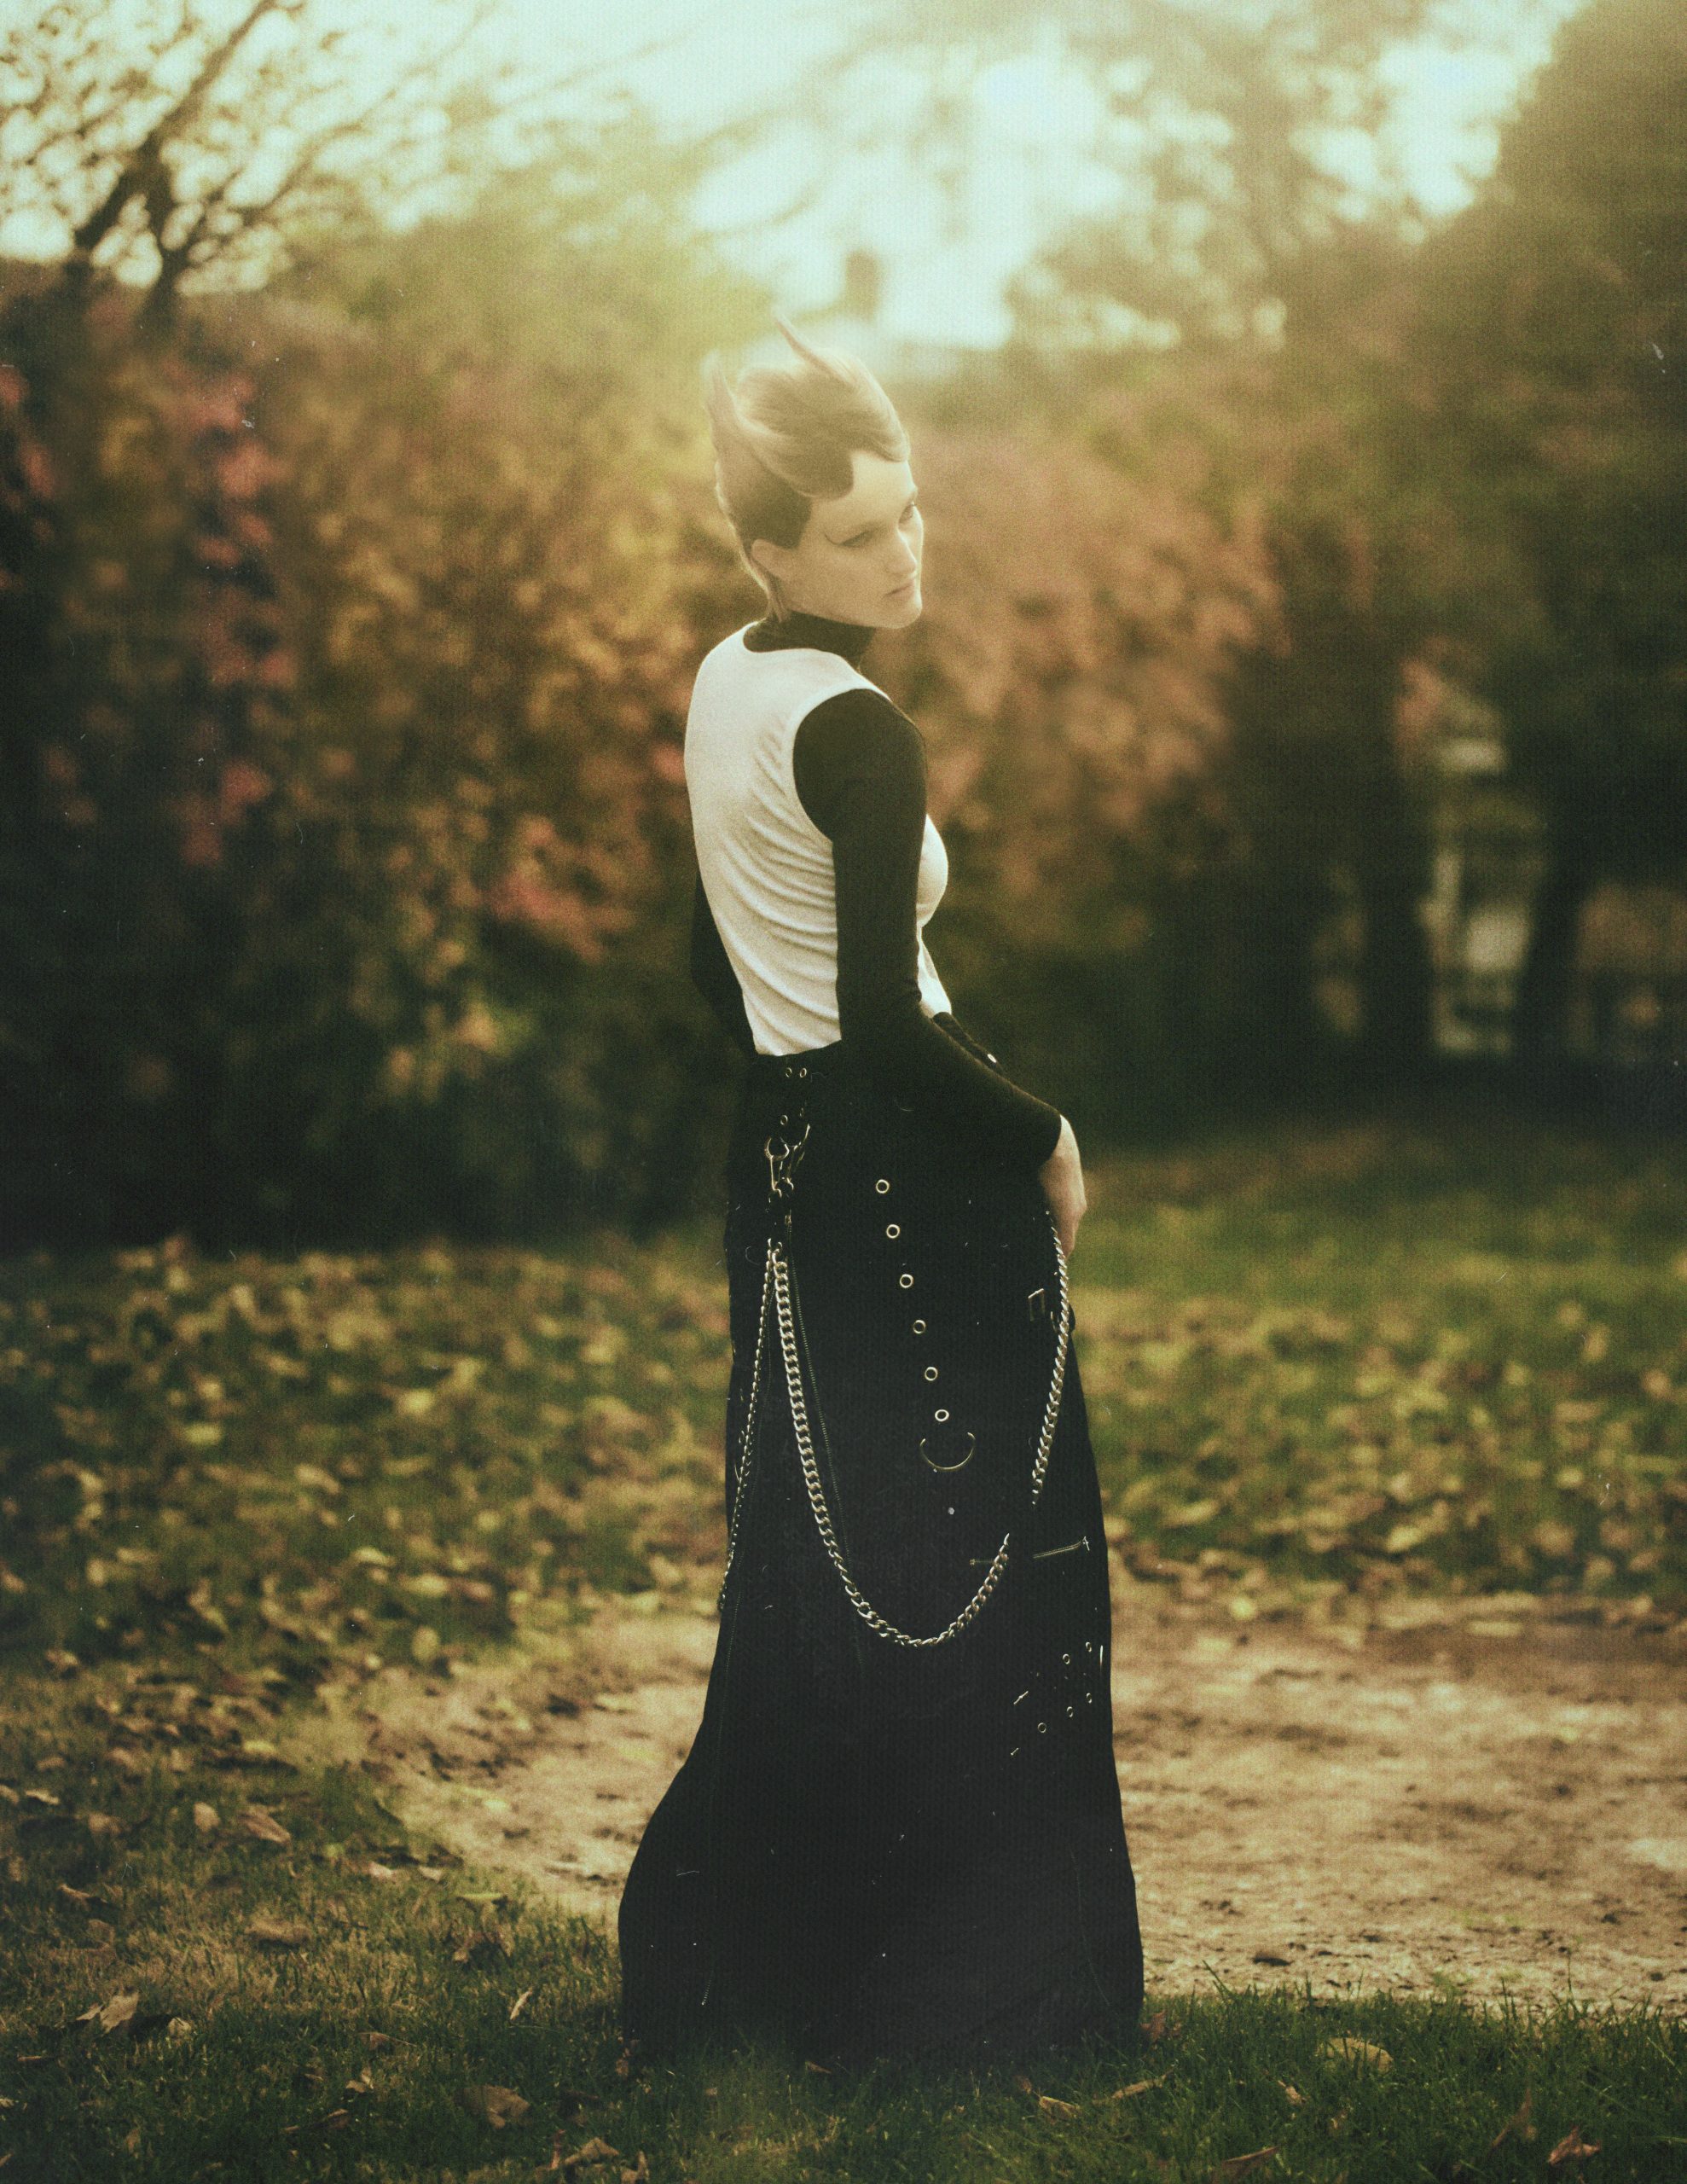 woman wearing a long black skirt with chains standing on grass